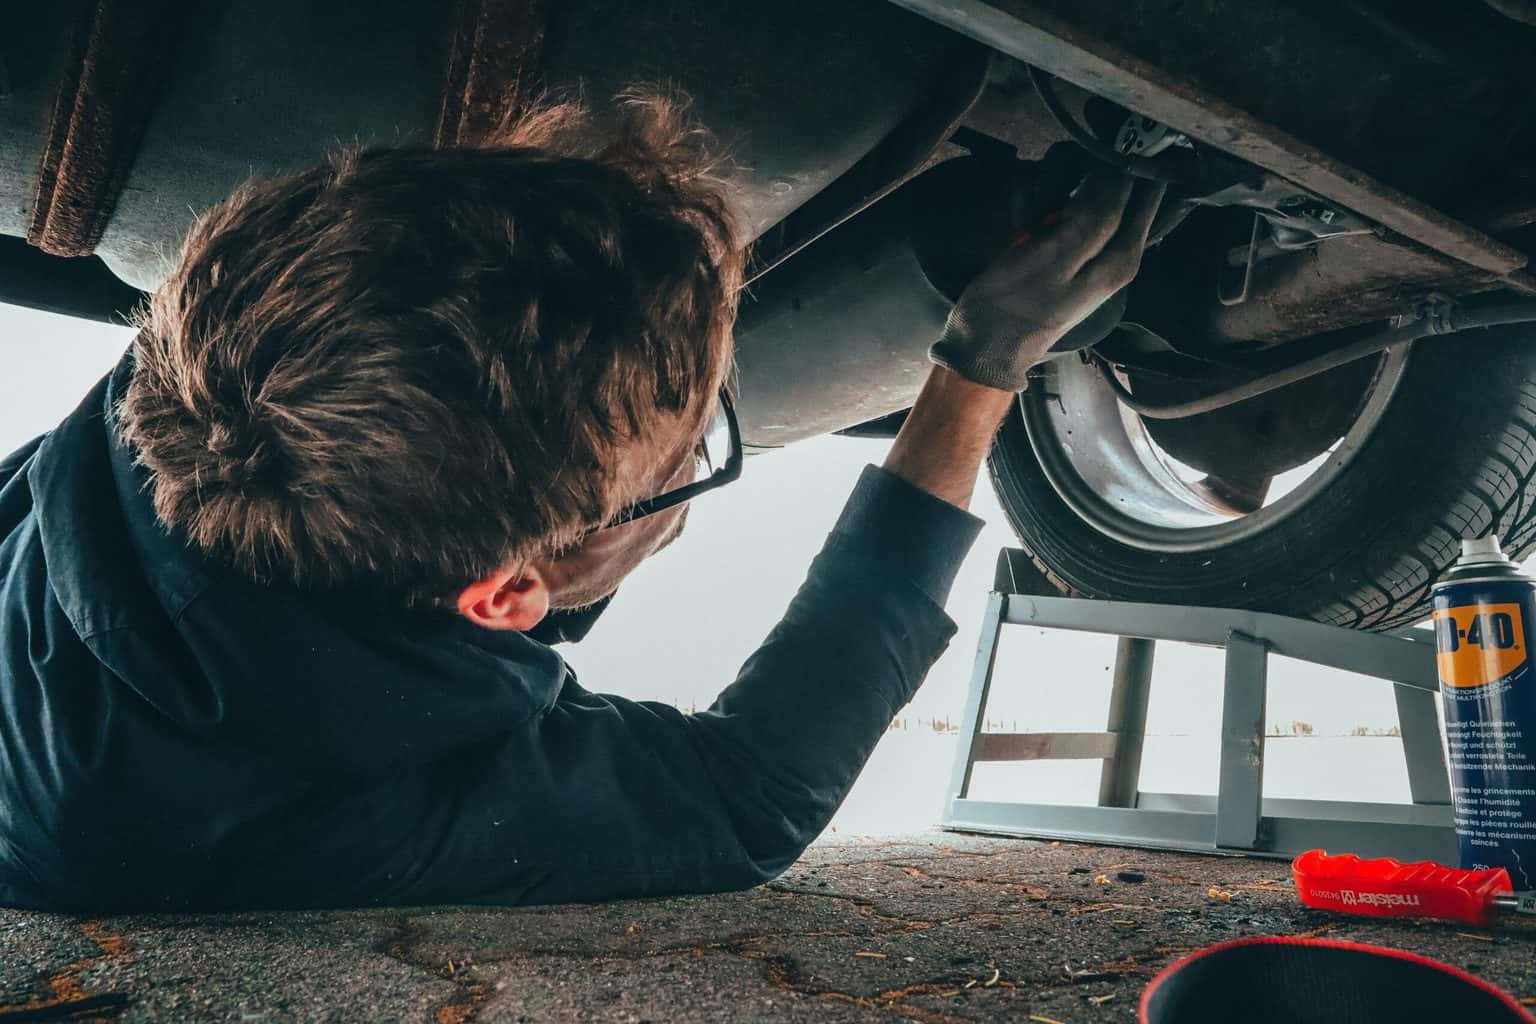 A man under the vehicle fixing an engine